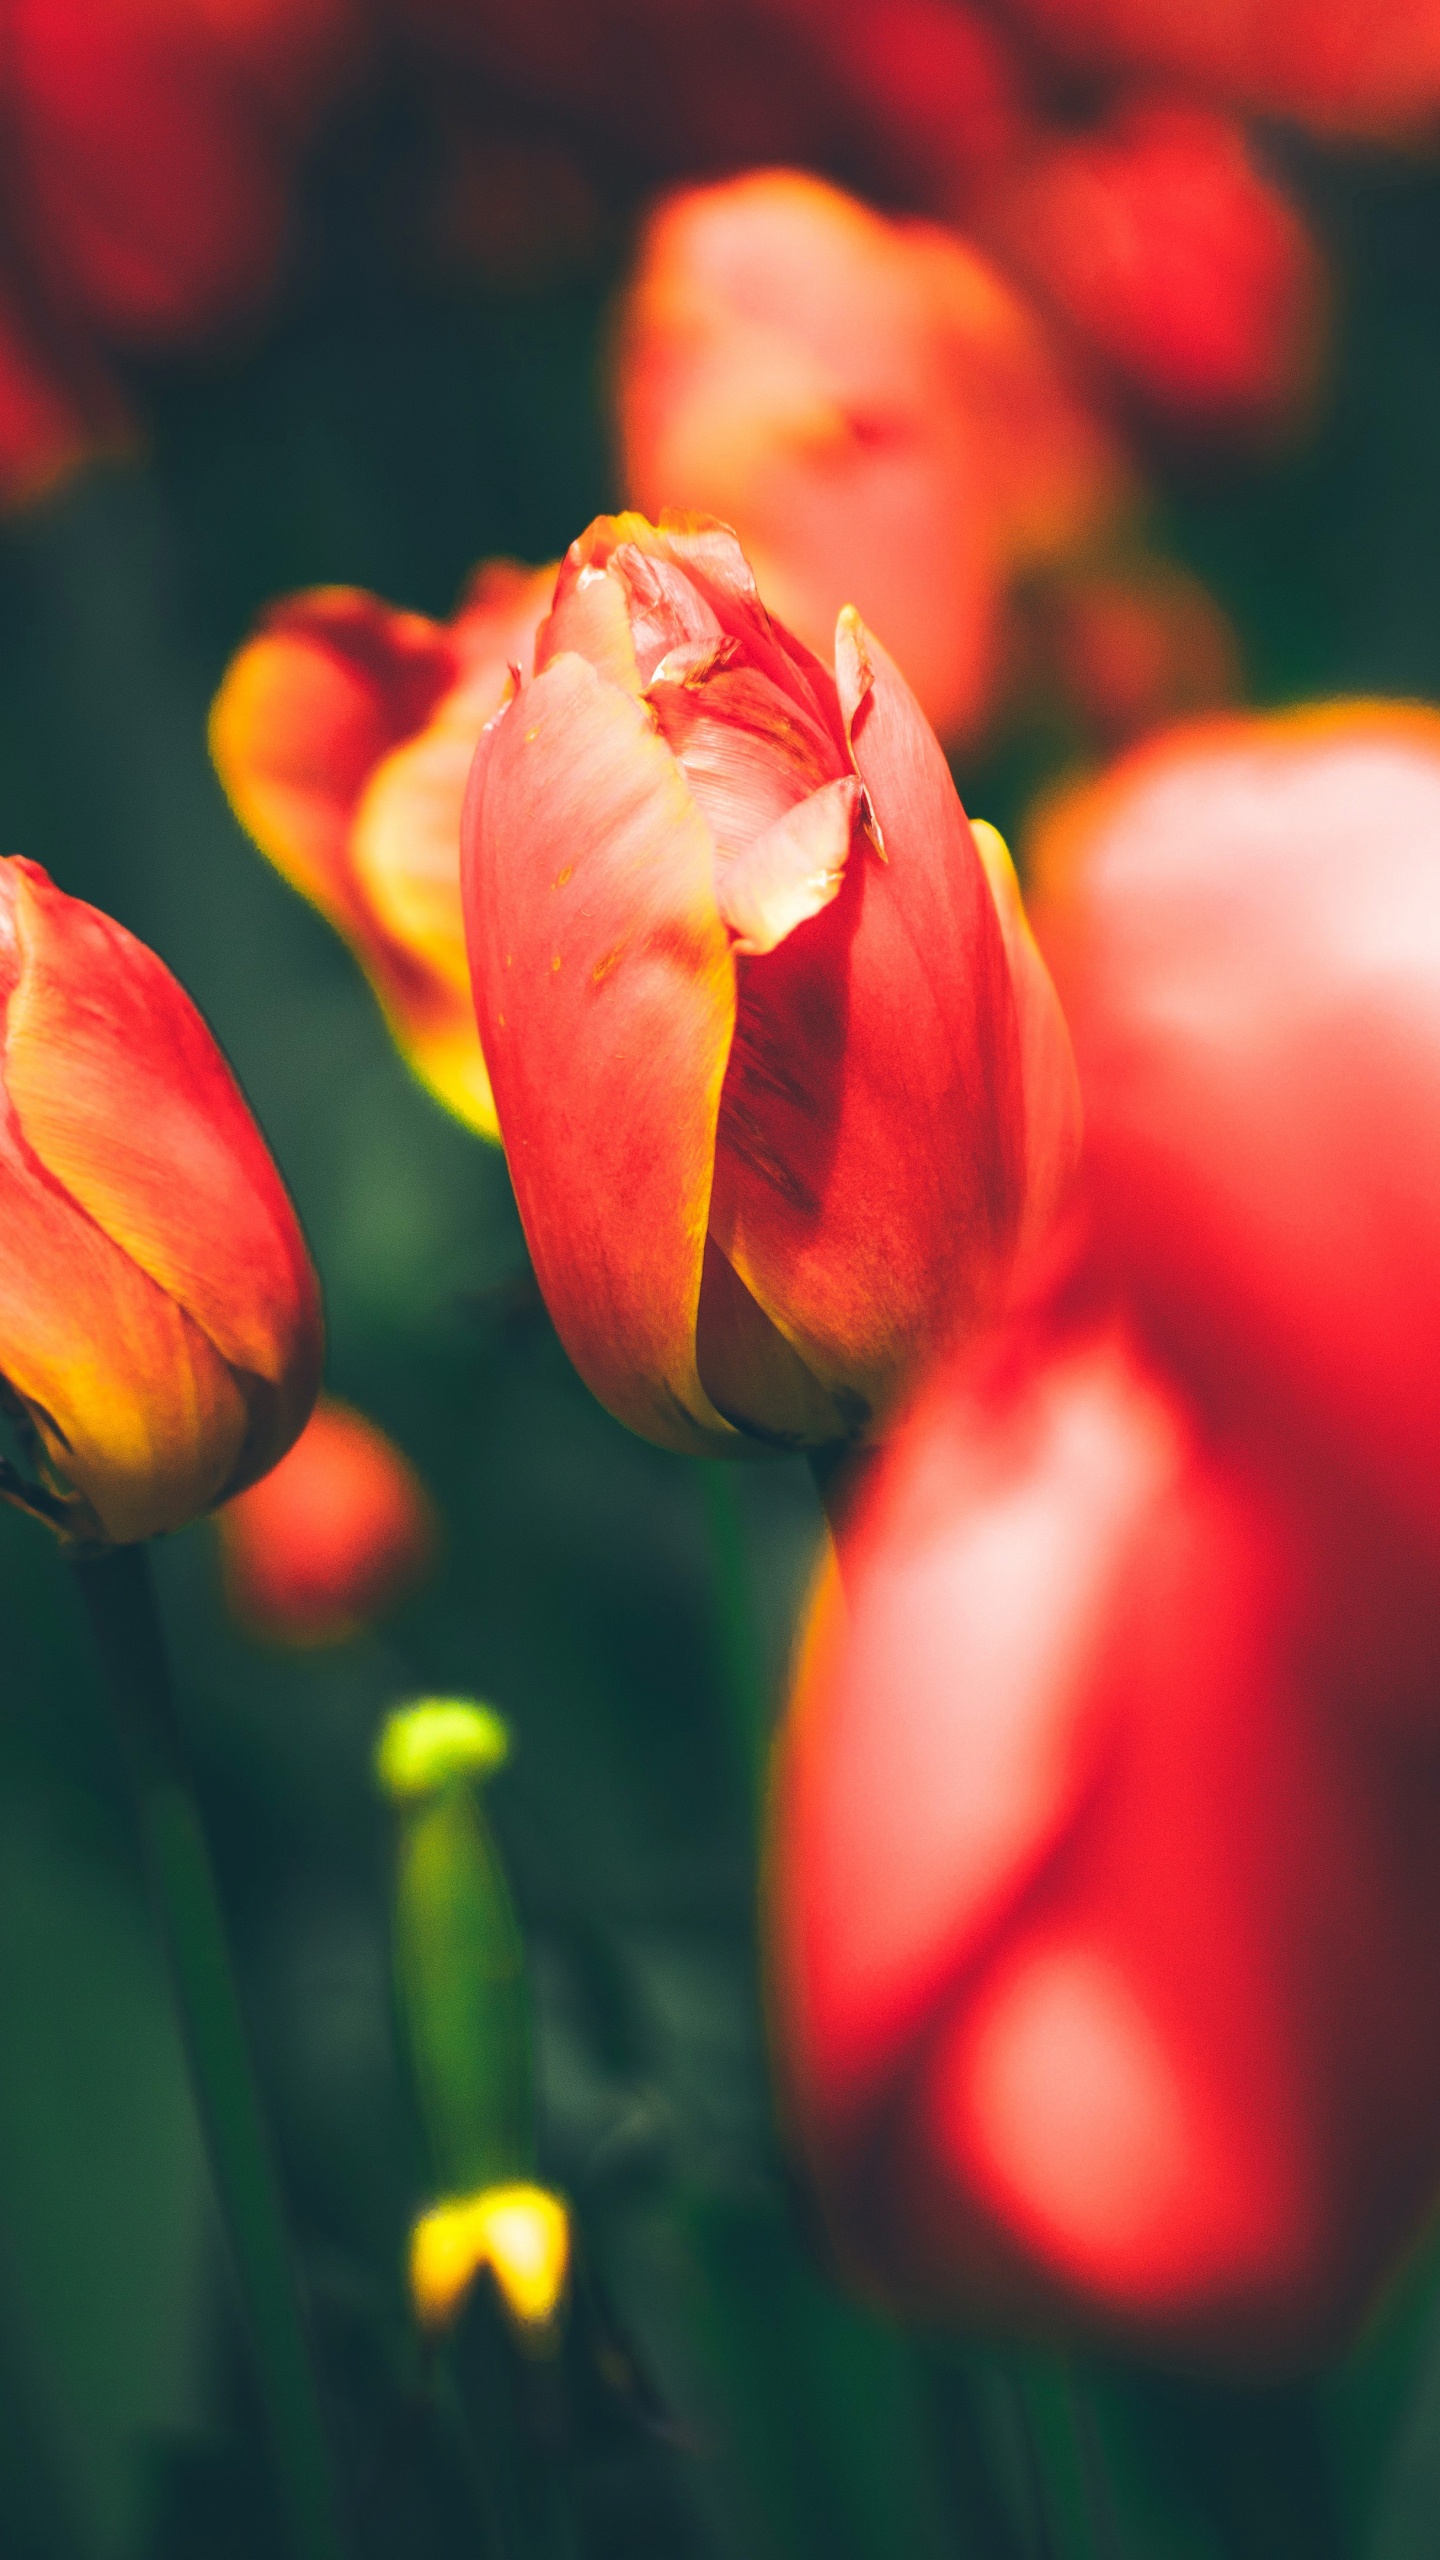 Red Tulips in Bloom During Daytime. Wallpaper in 1440x2560 Resolution